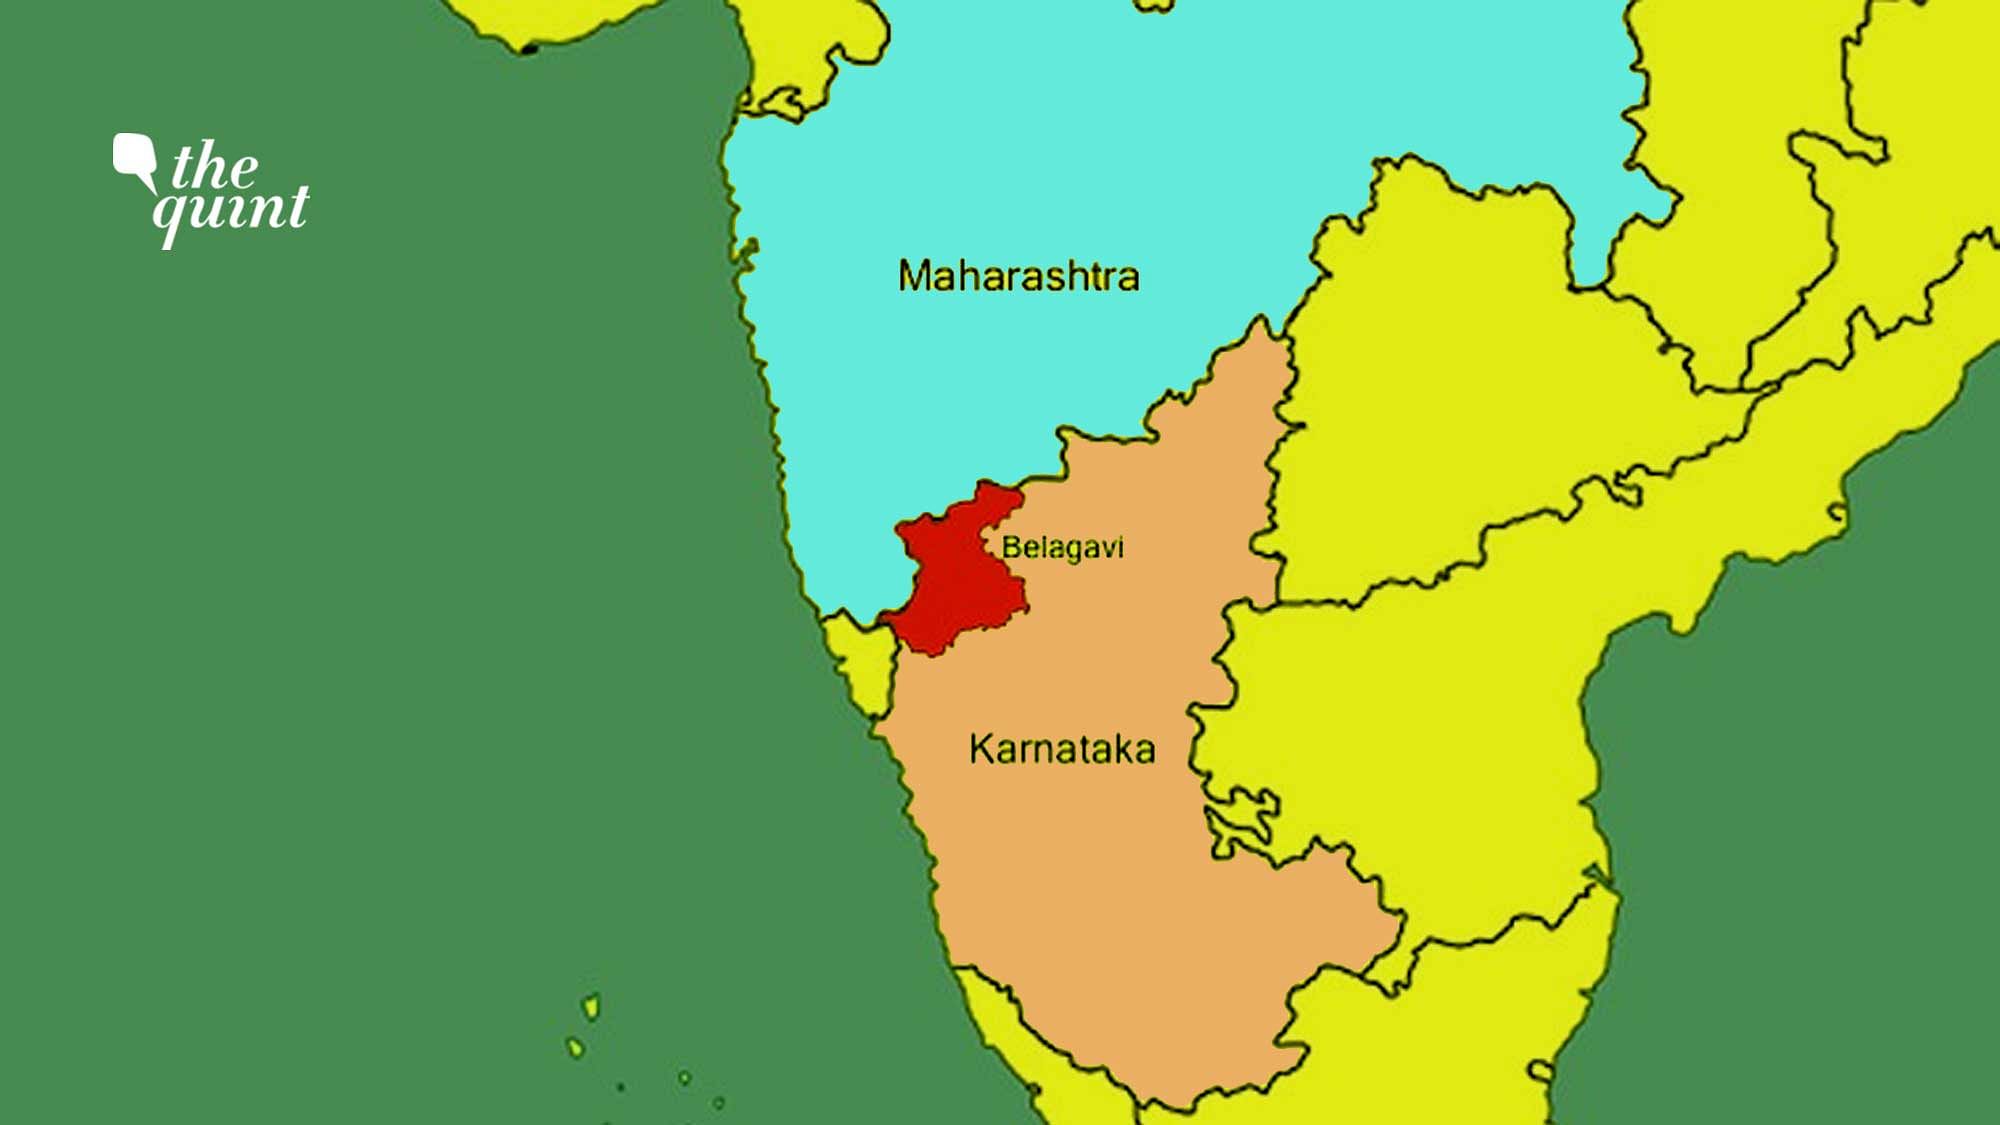 Karnataka Deputy CM suggested that Mumbai should be included in his state, amid war of words over border dispute.